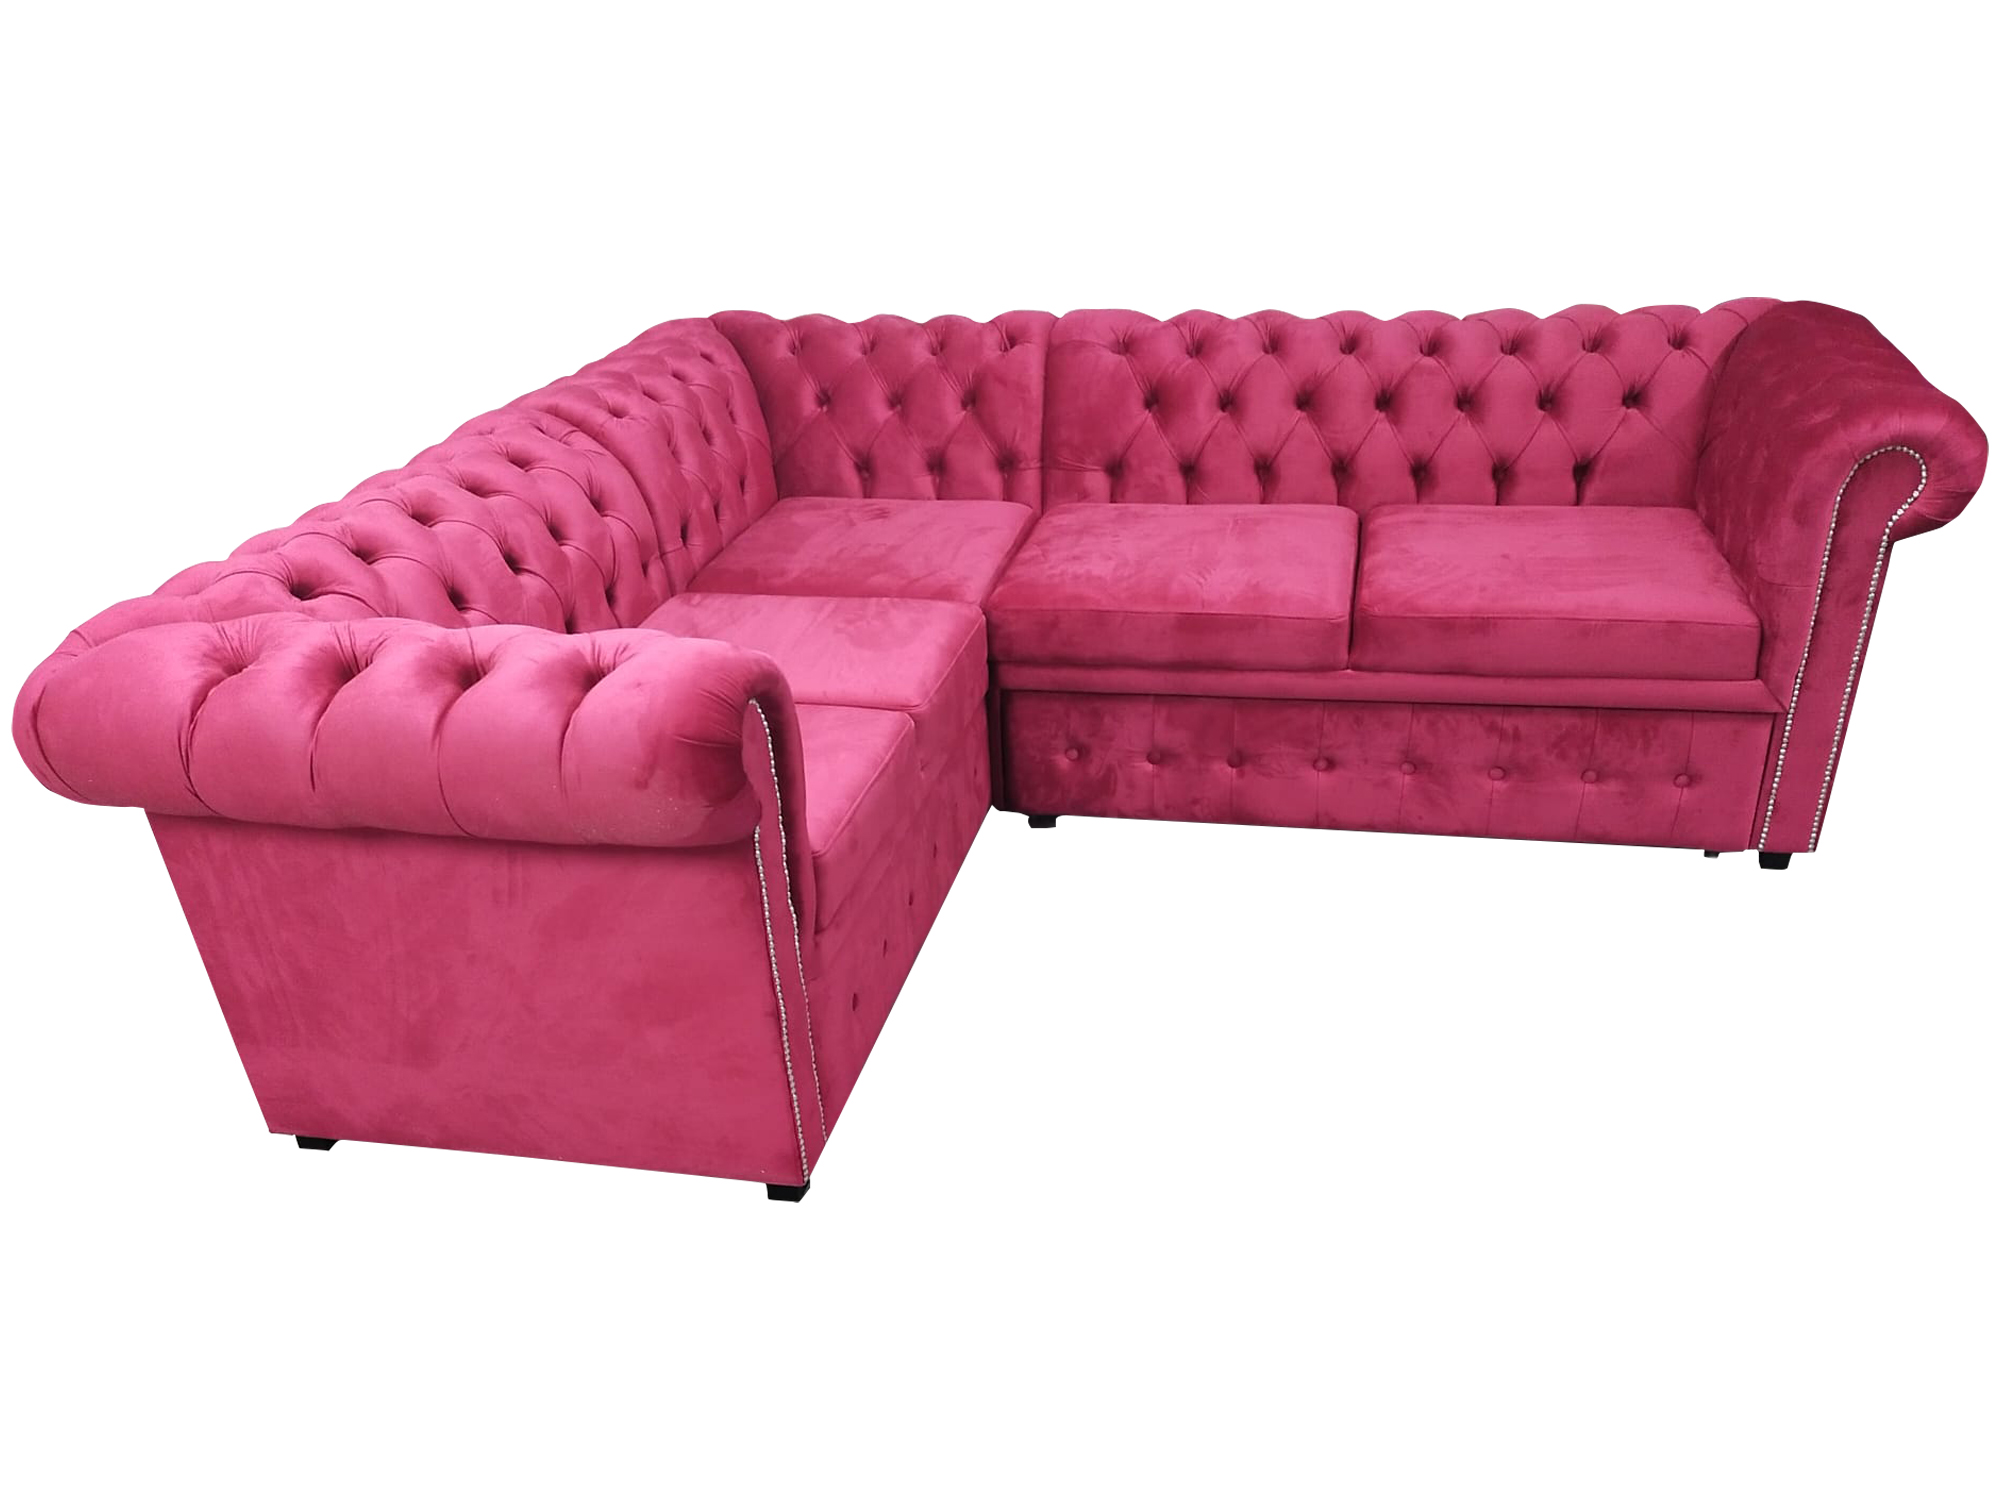 Luxury Corner Sofa L Shape Chesterfield Sofa Textile Pink Couch Modern Sofas